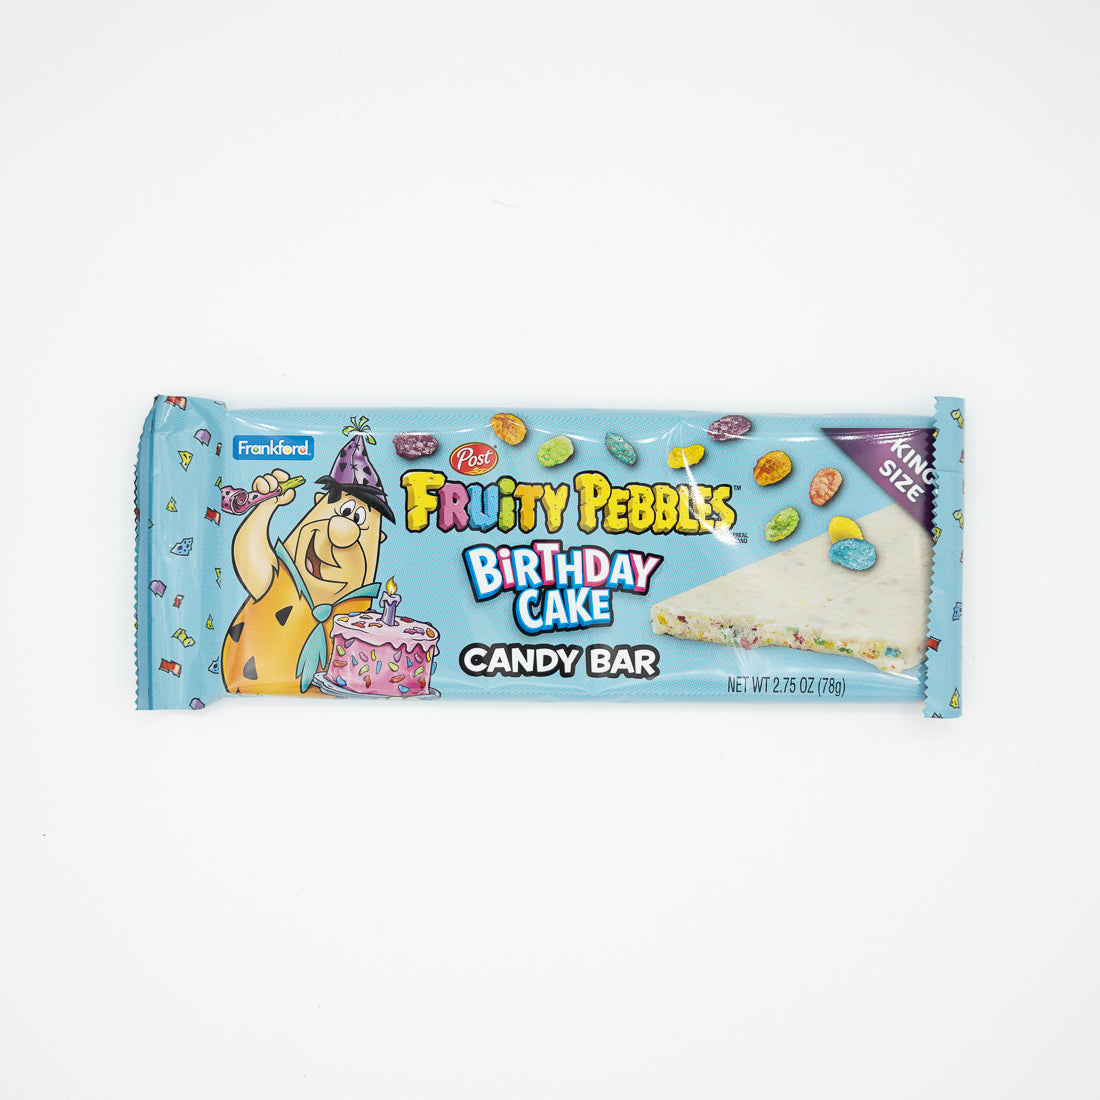 Fruity Pebbles Birthday Cake Candy Bar-King Size